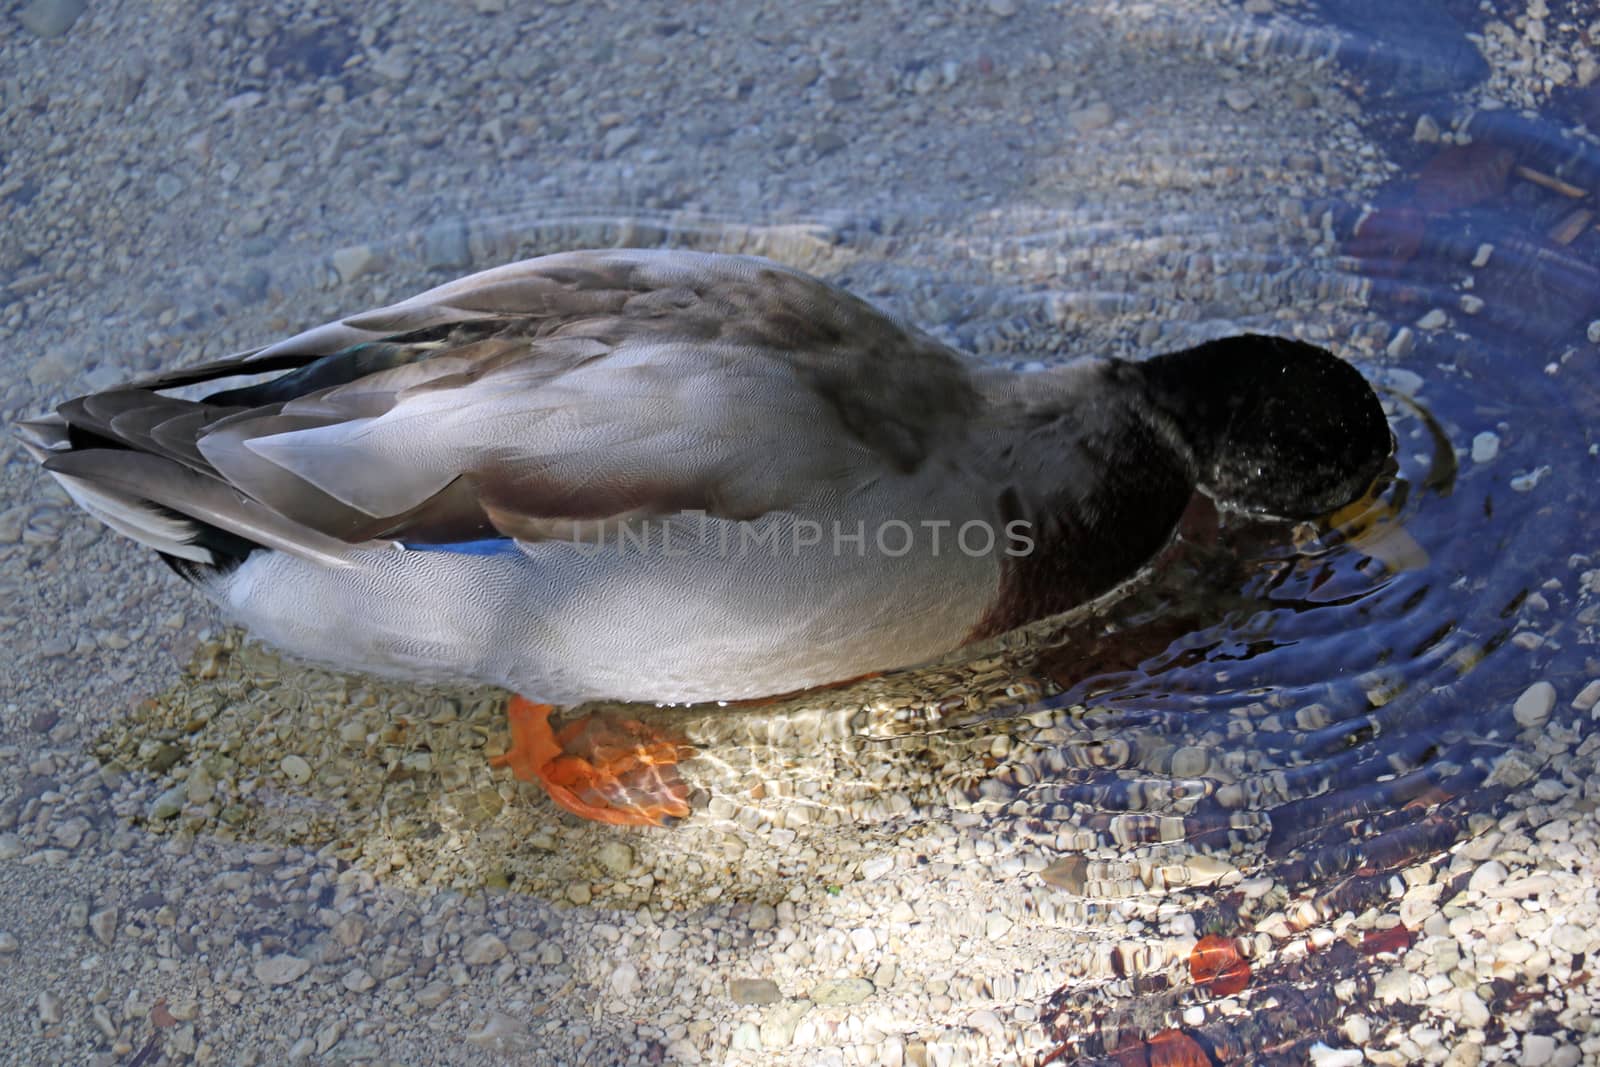 Wild duck come ashore from the water. by kip02kas